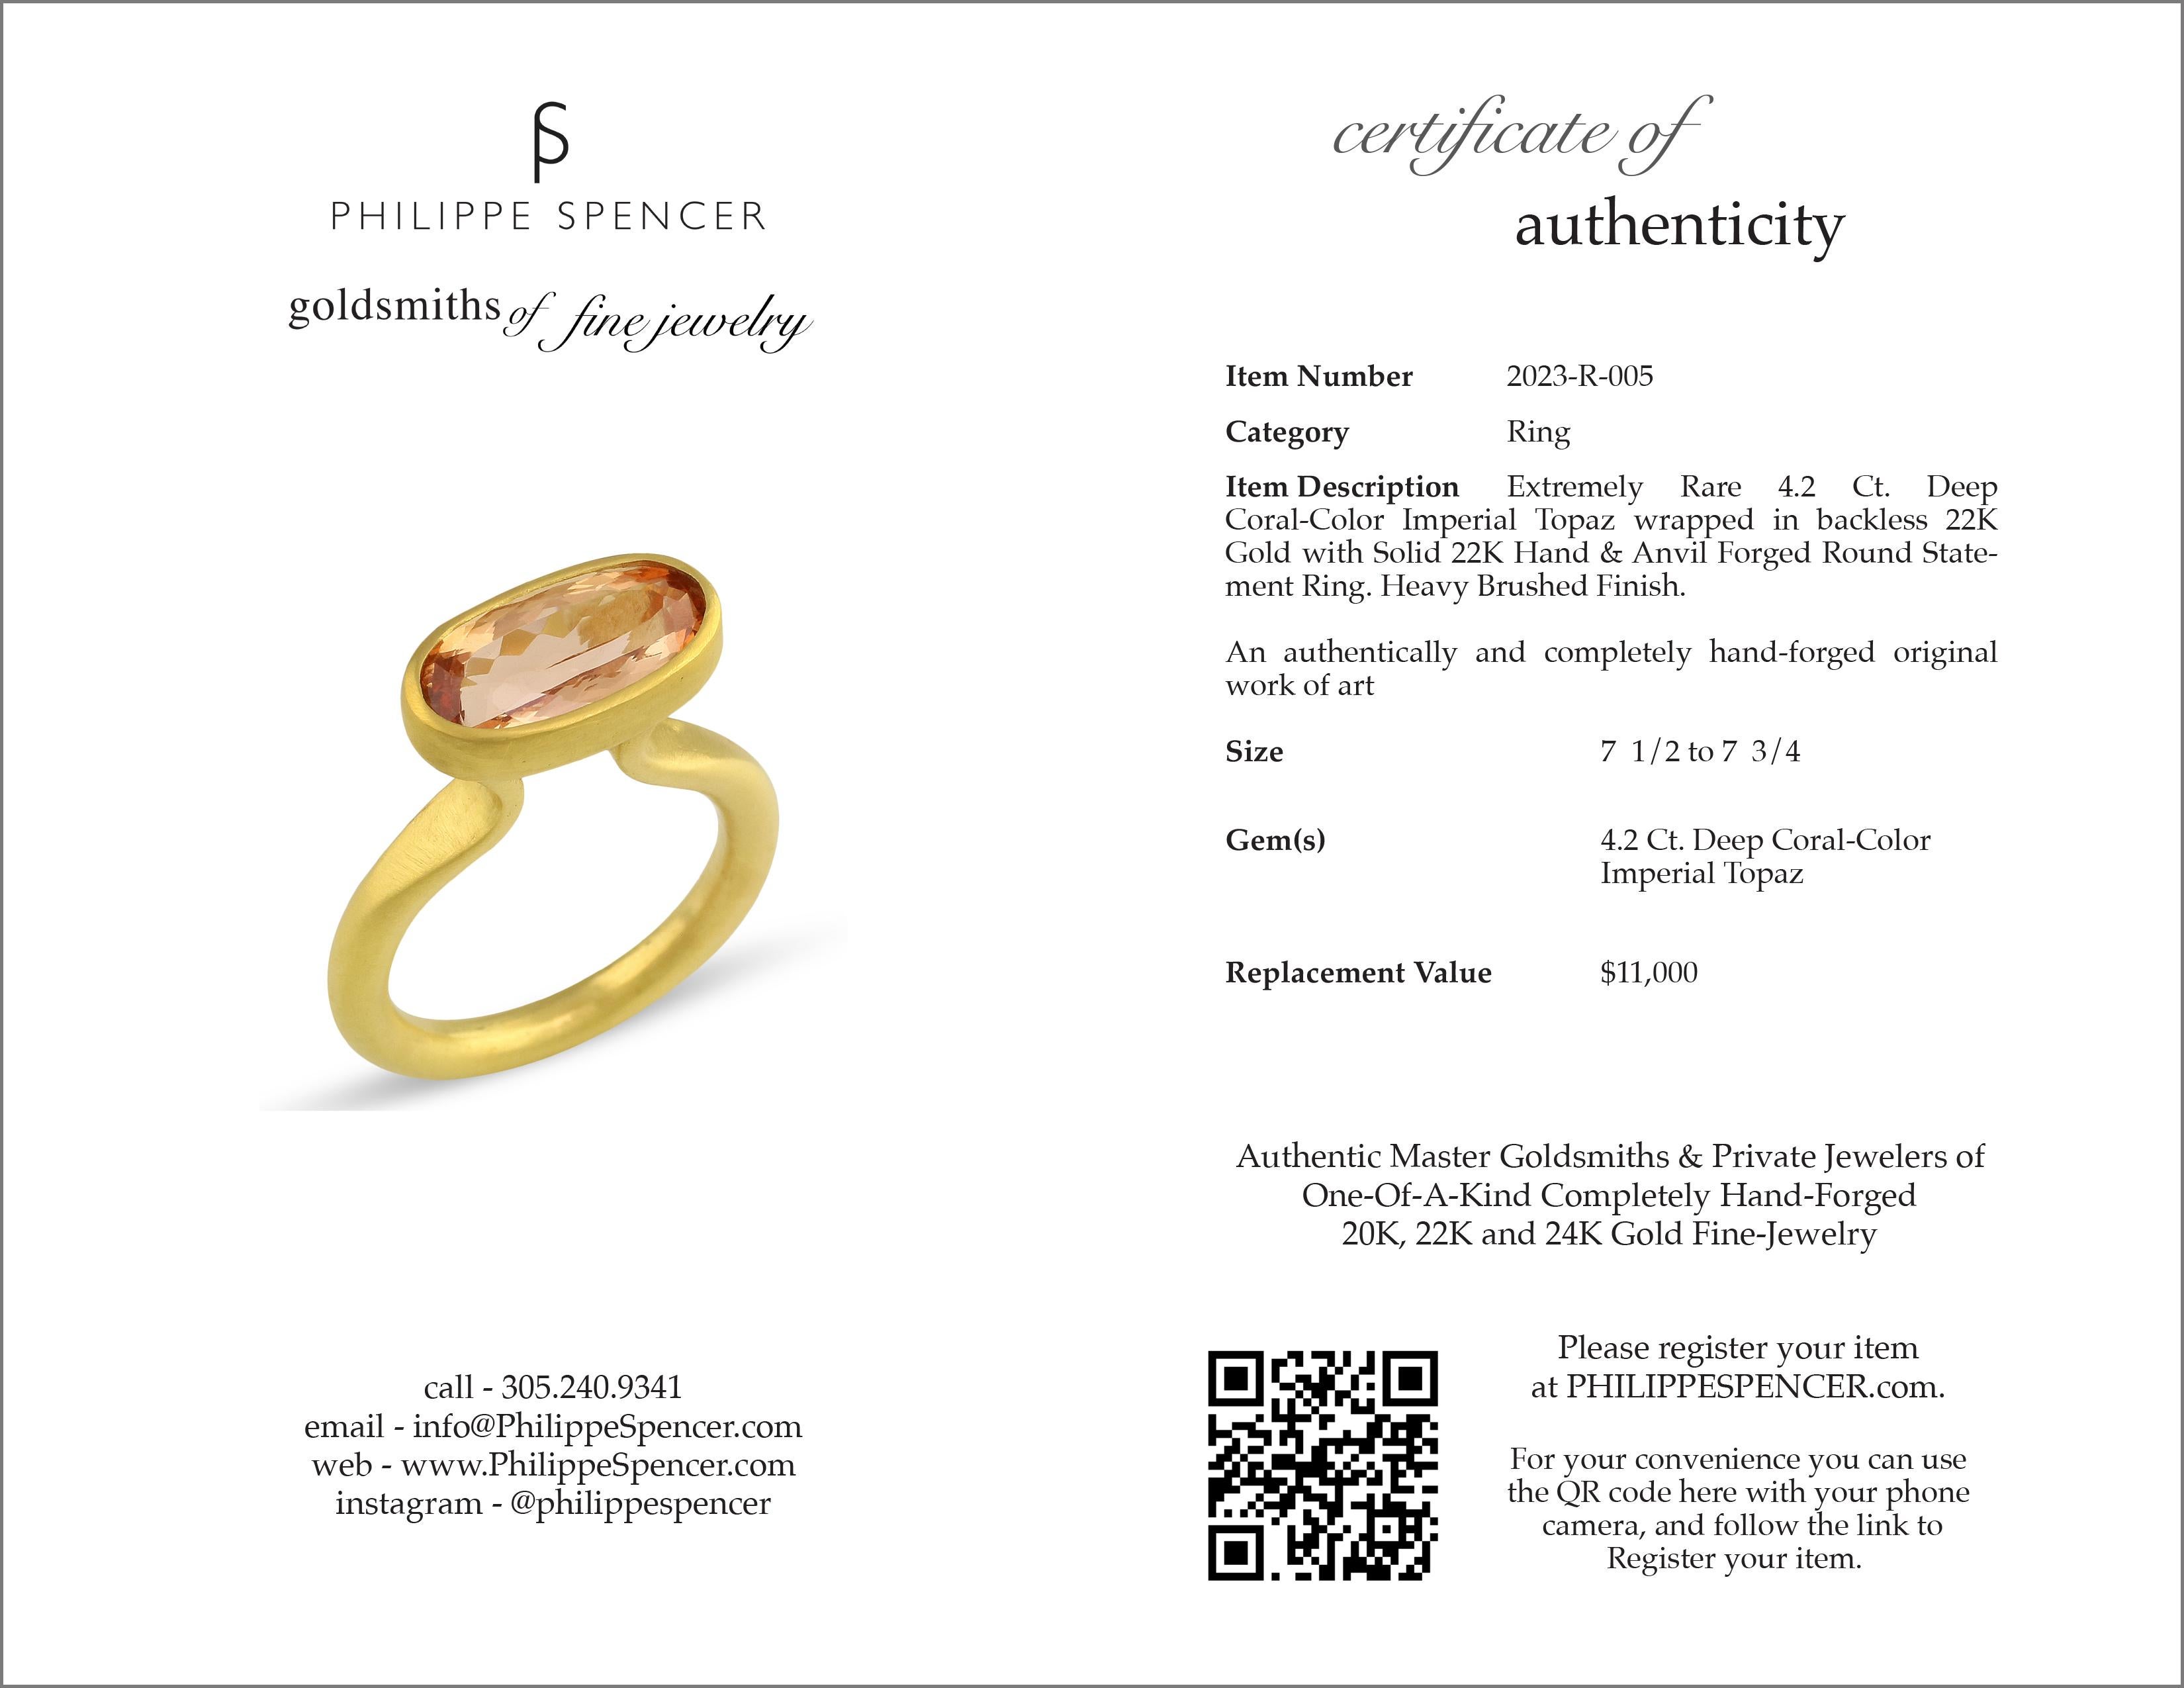 Oval Cut PHILIPPE SPENCER 4.2 Ct. Imperial Topaz in 22K and 20K Gold Statement Ring For Sale